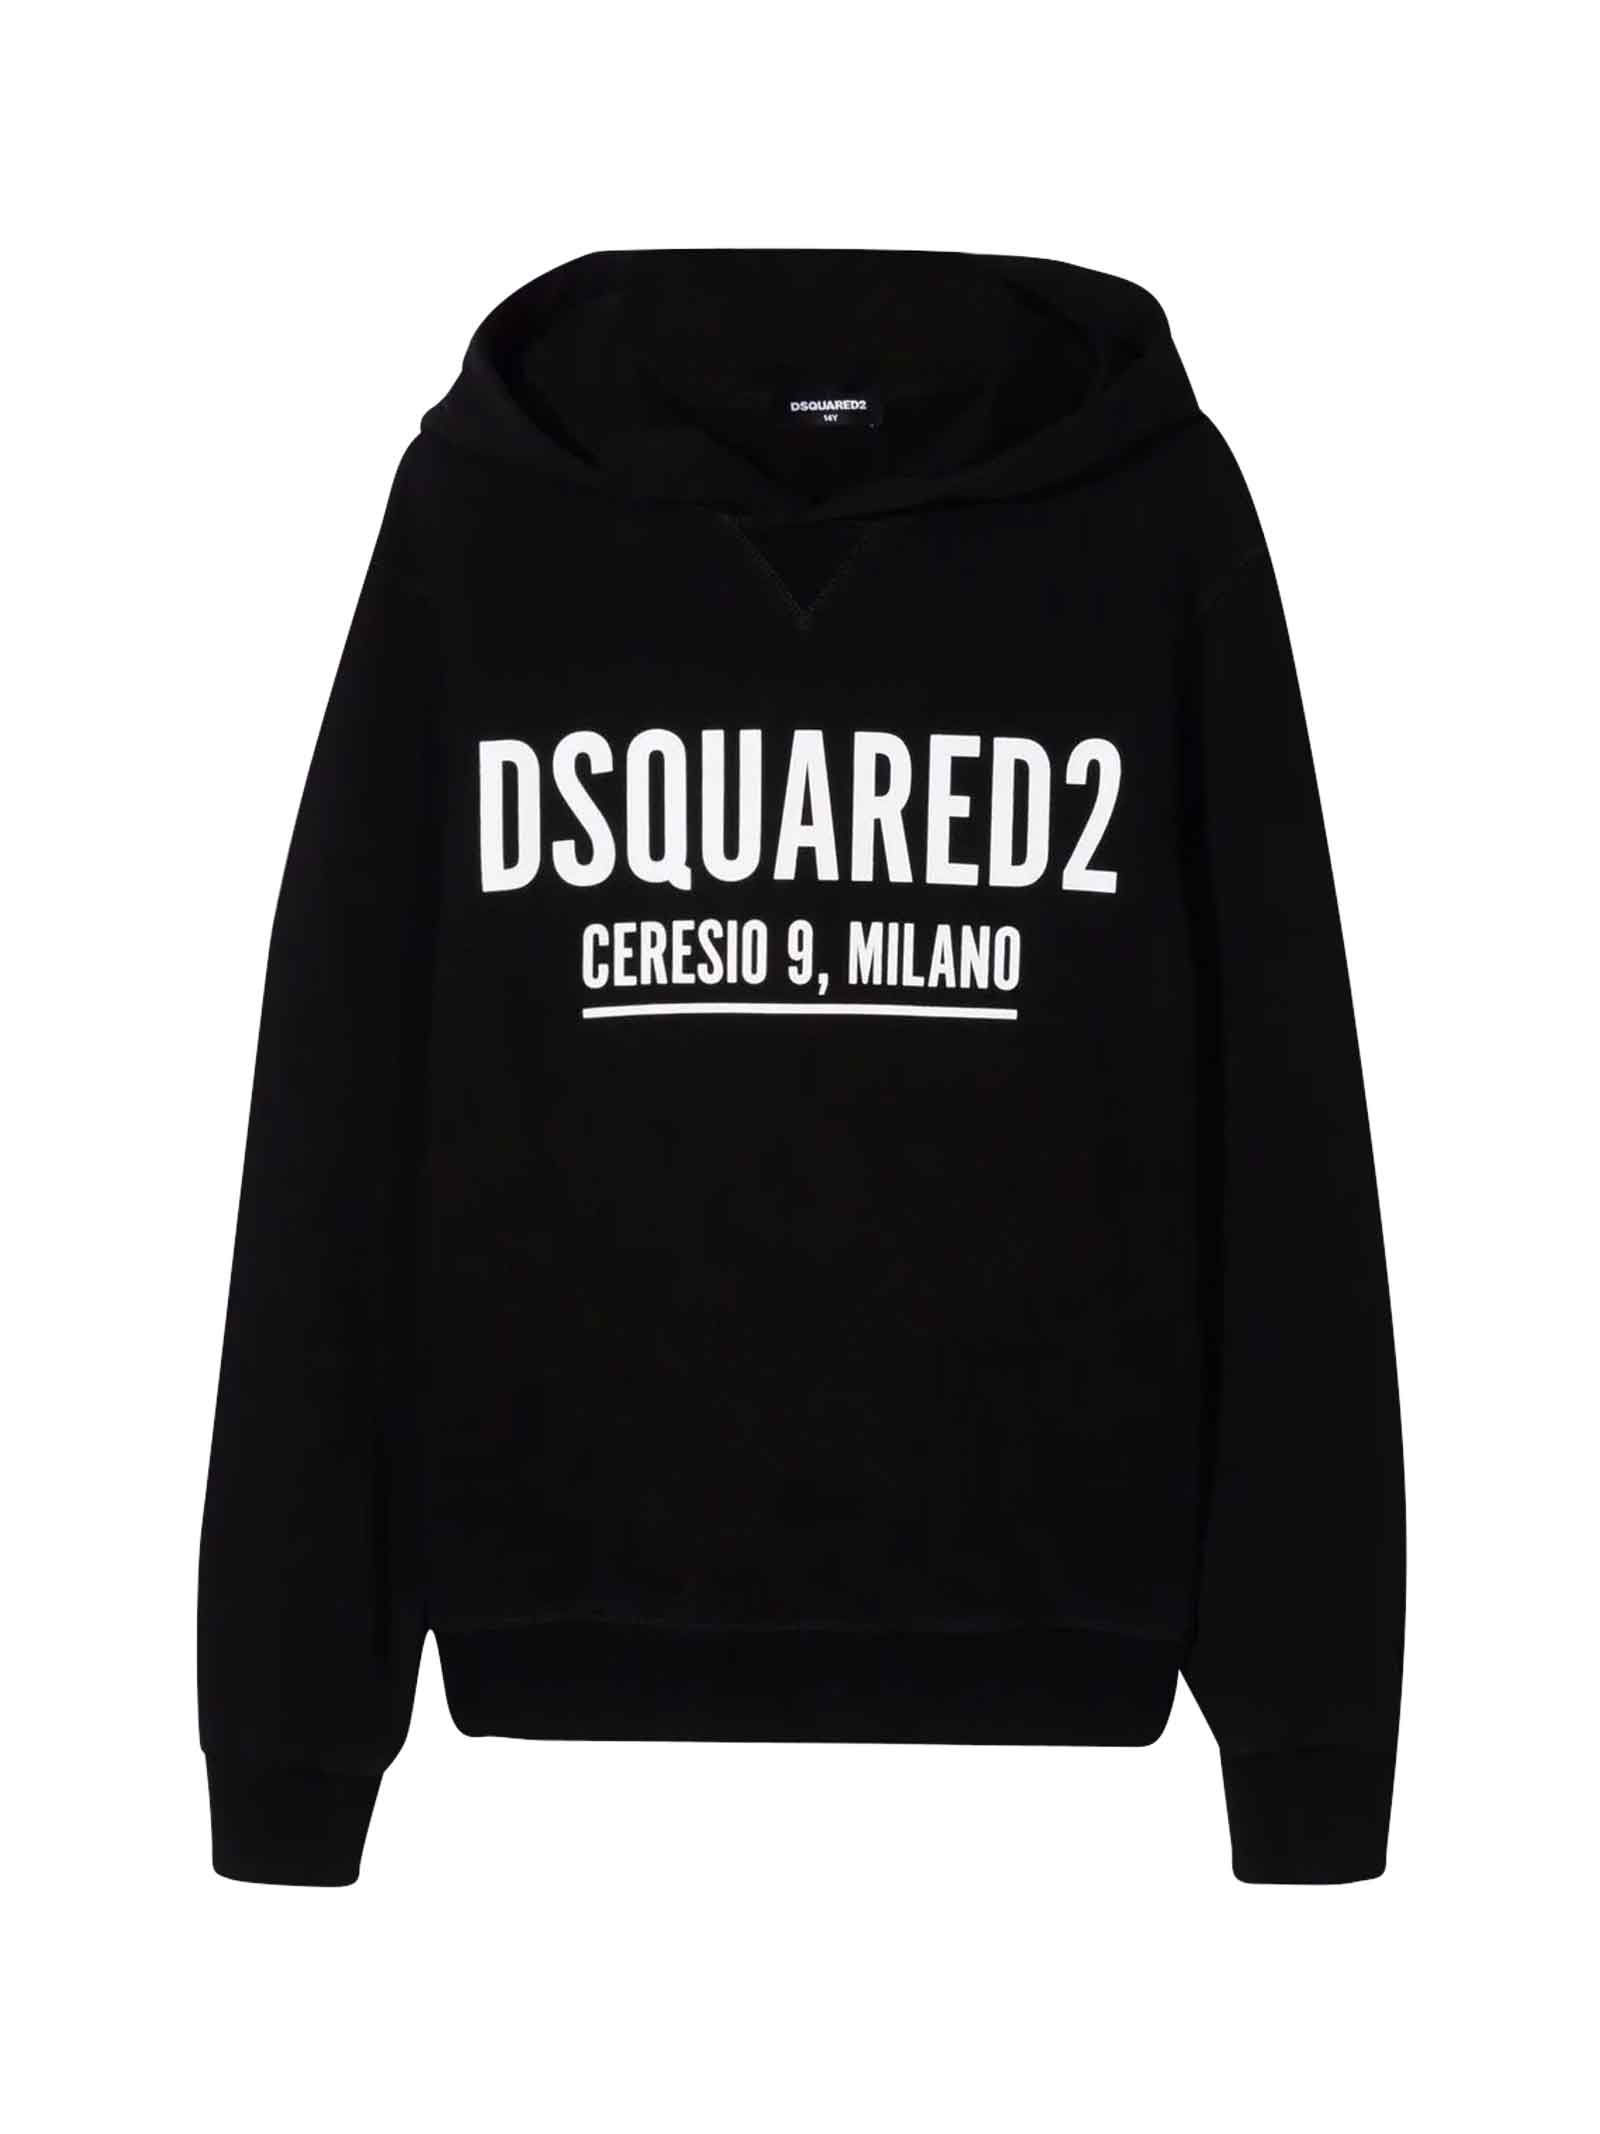 Dsquared2 Black Sweatshirt With White Print And Hood Dsquared Kids